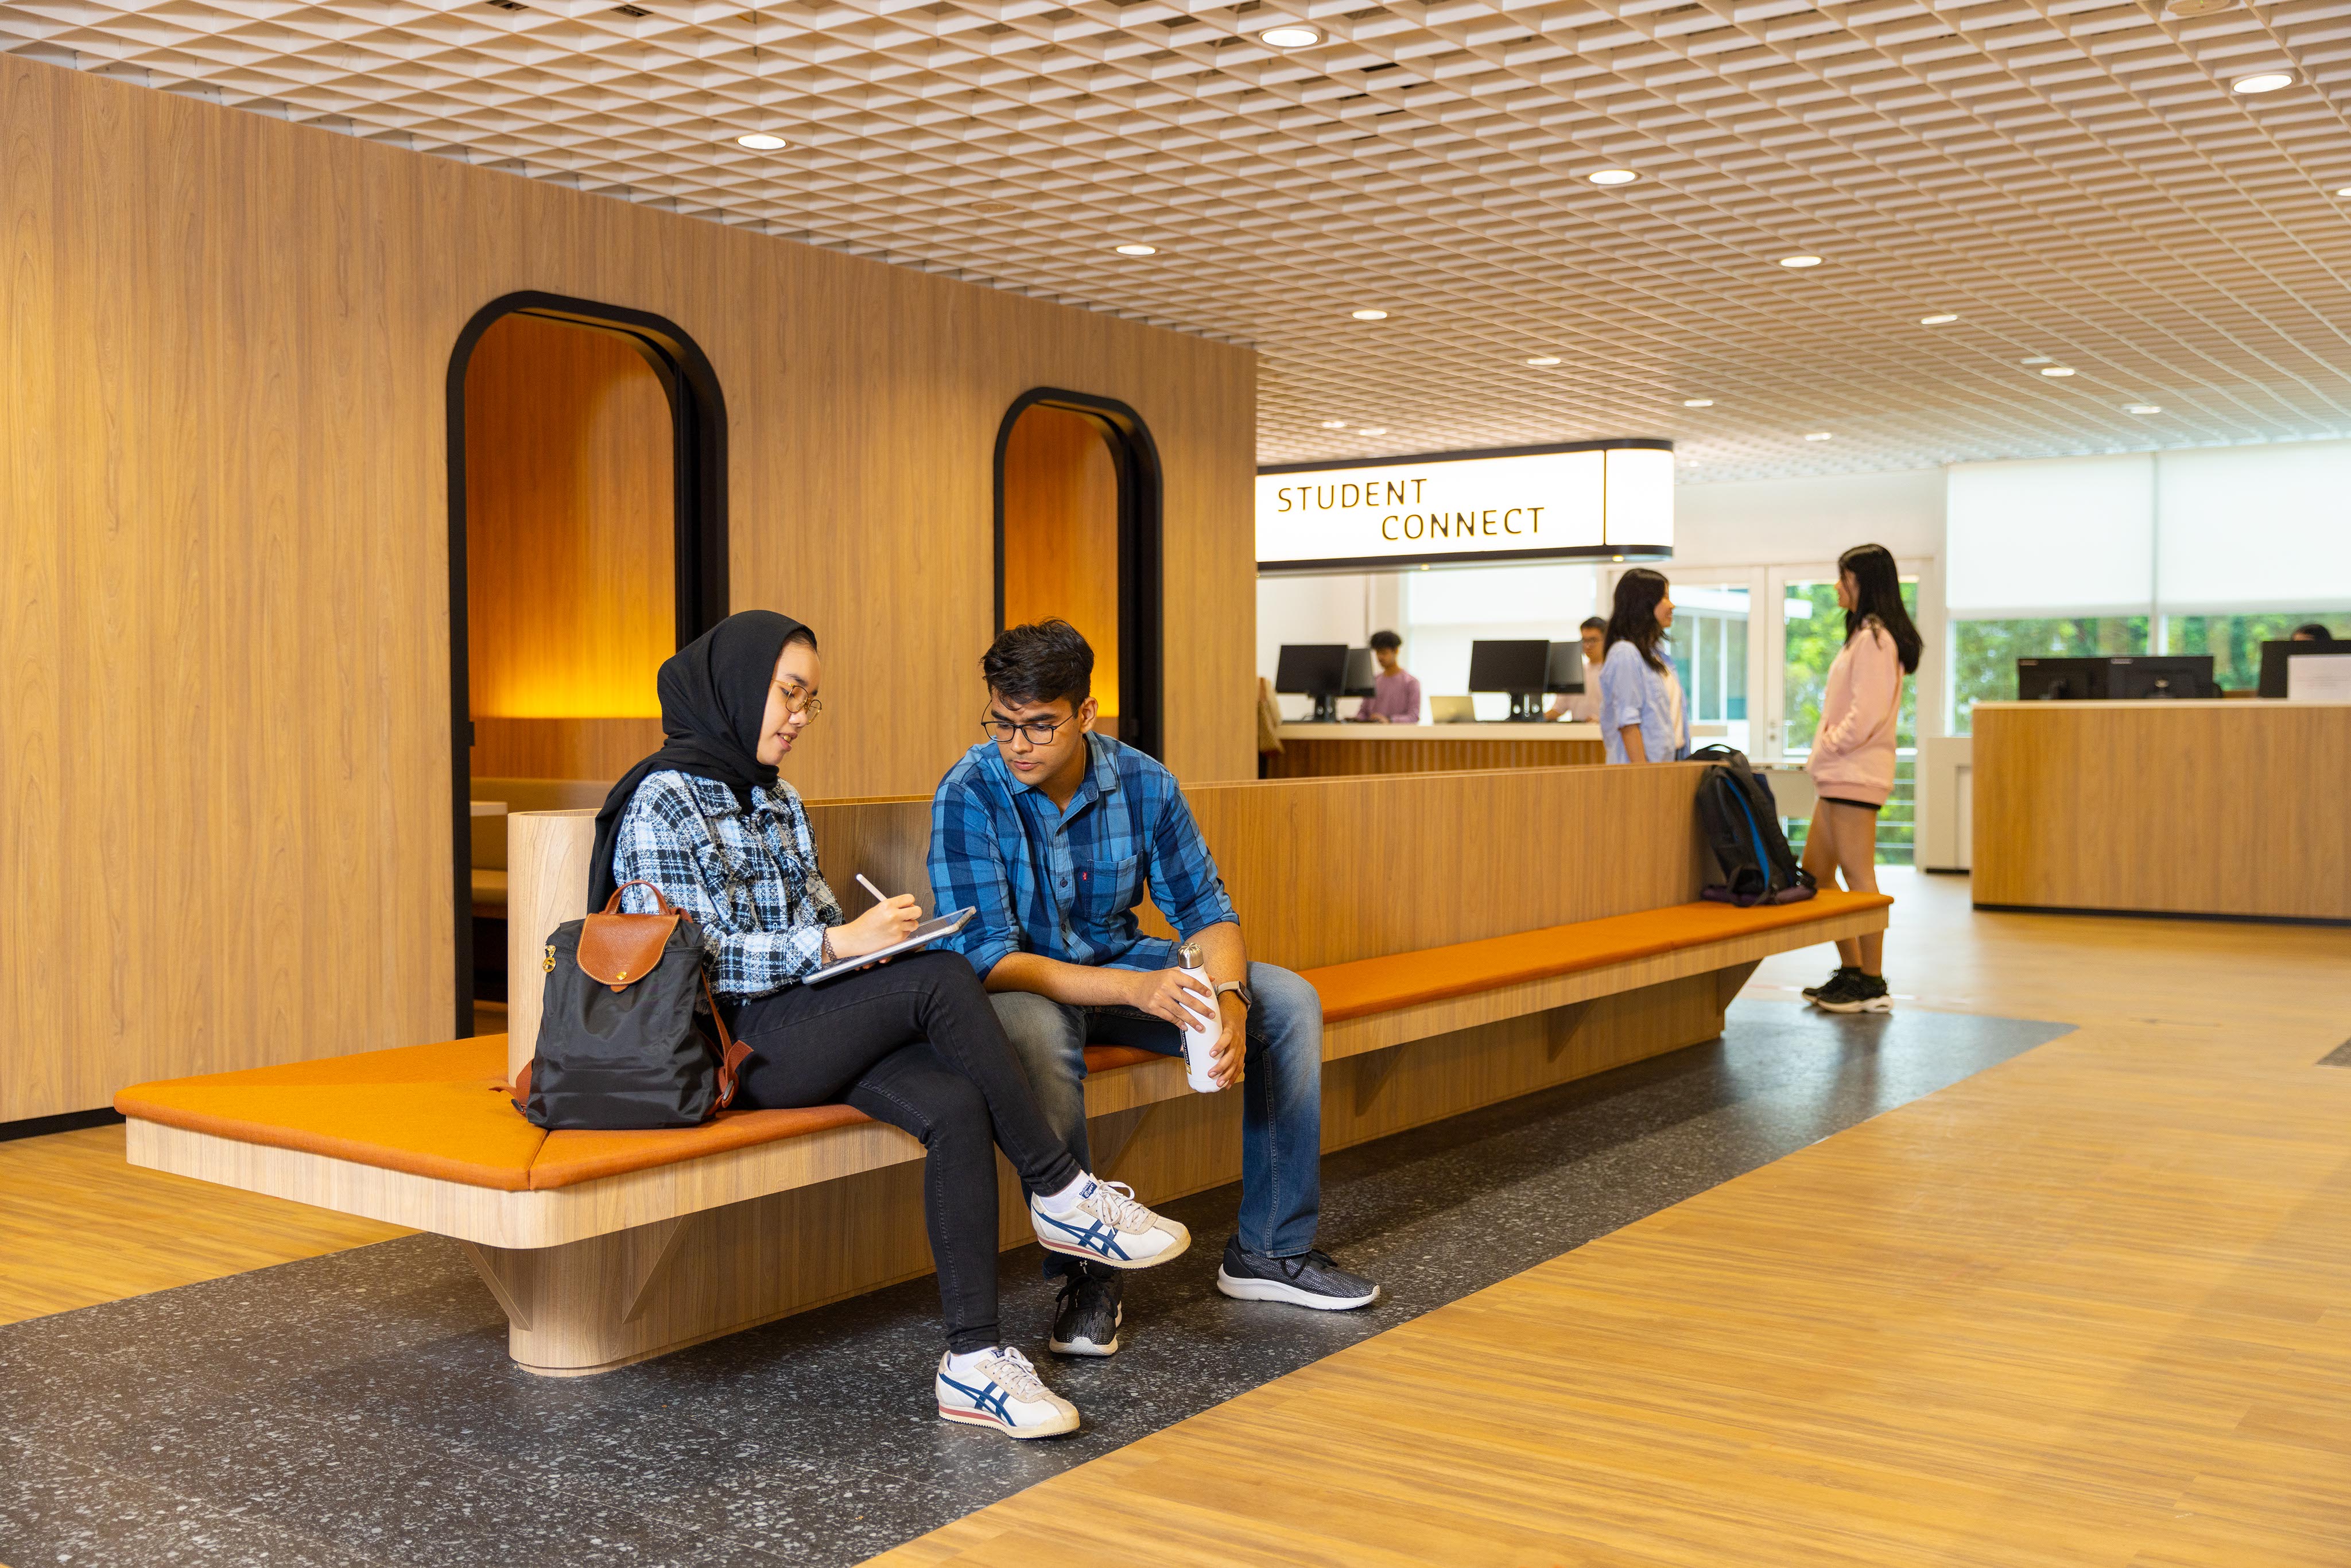 Casual spaces like the Student Connect facilitate interactions among students, and is a conducive place for discussions and collaborations to take place. Image courtesy of Curtin Singapore.